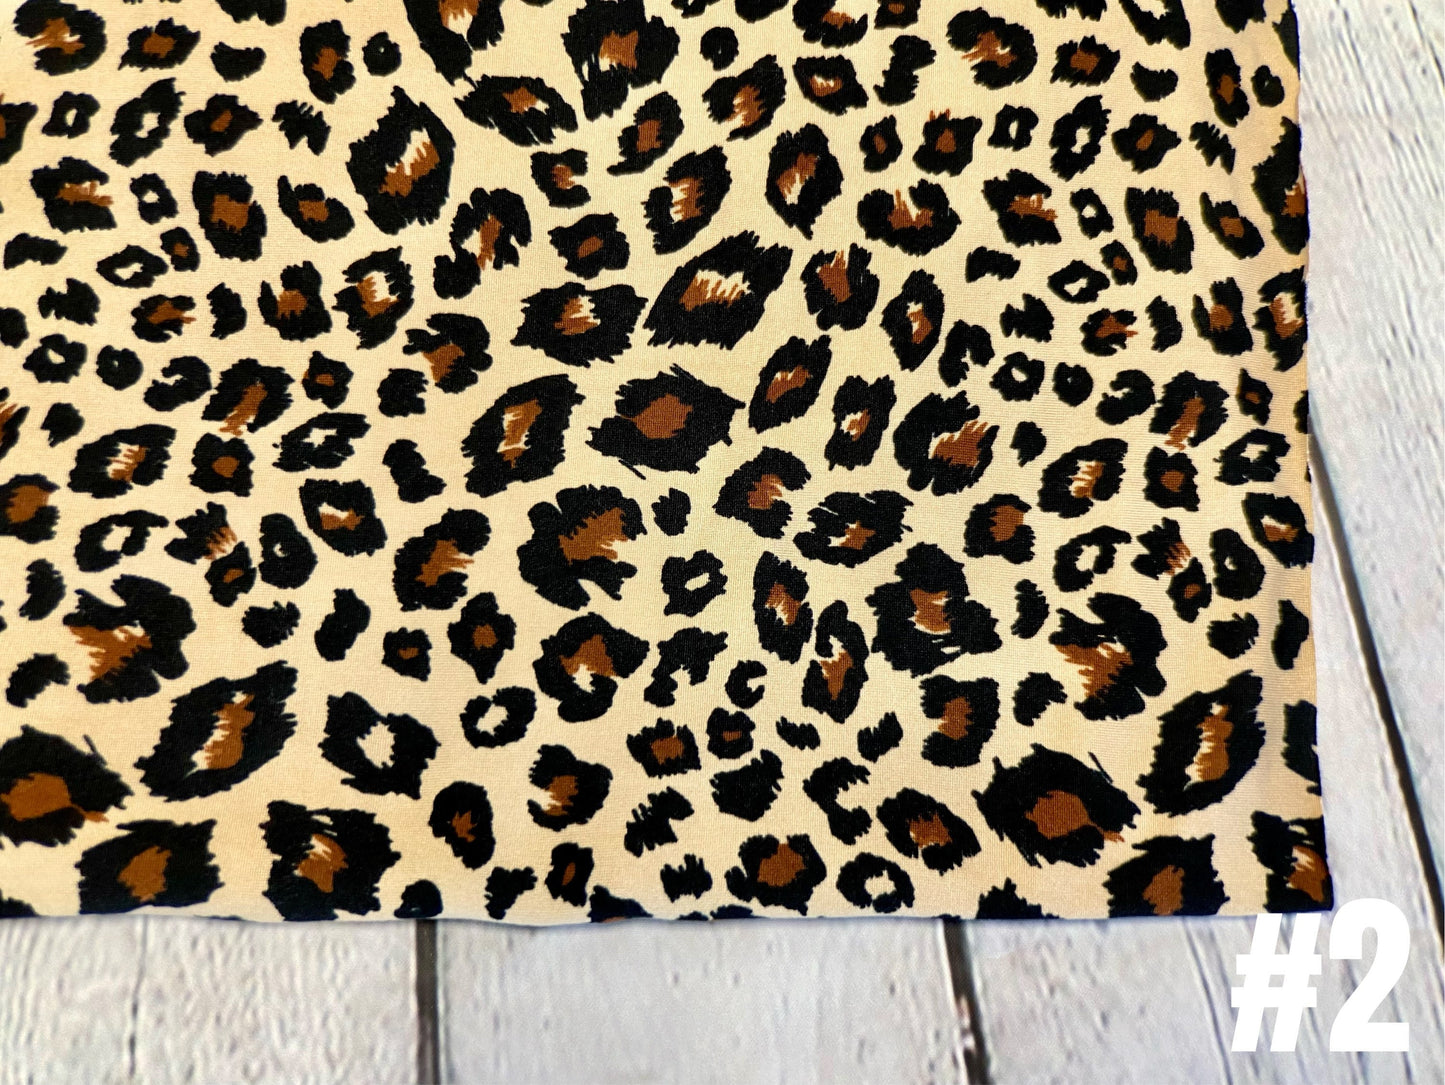 DBP Leopard Cheetah Animal Print Fabric By The Yard Double Brush Poly Print Soft Butter Fabric